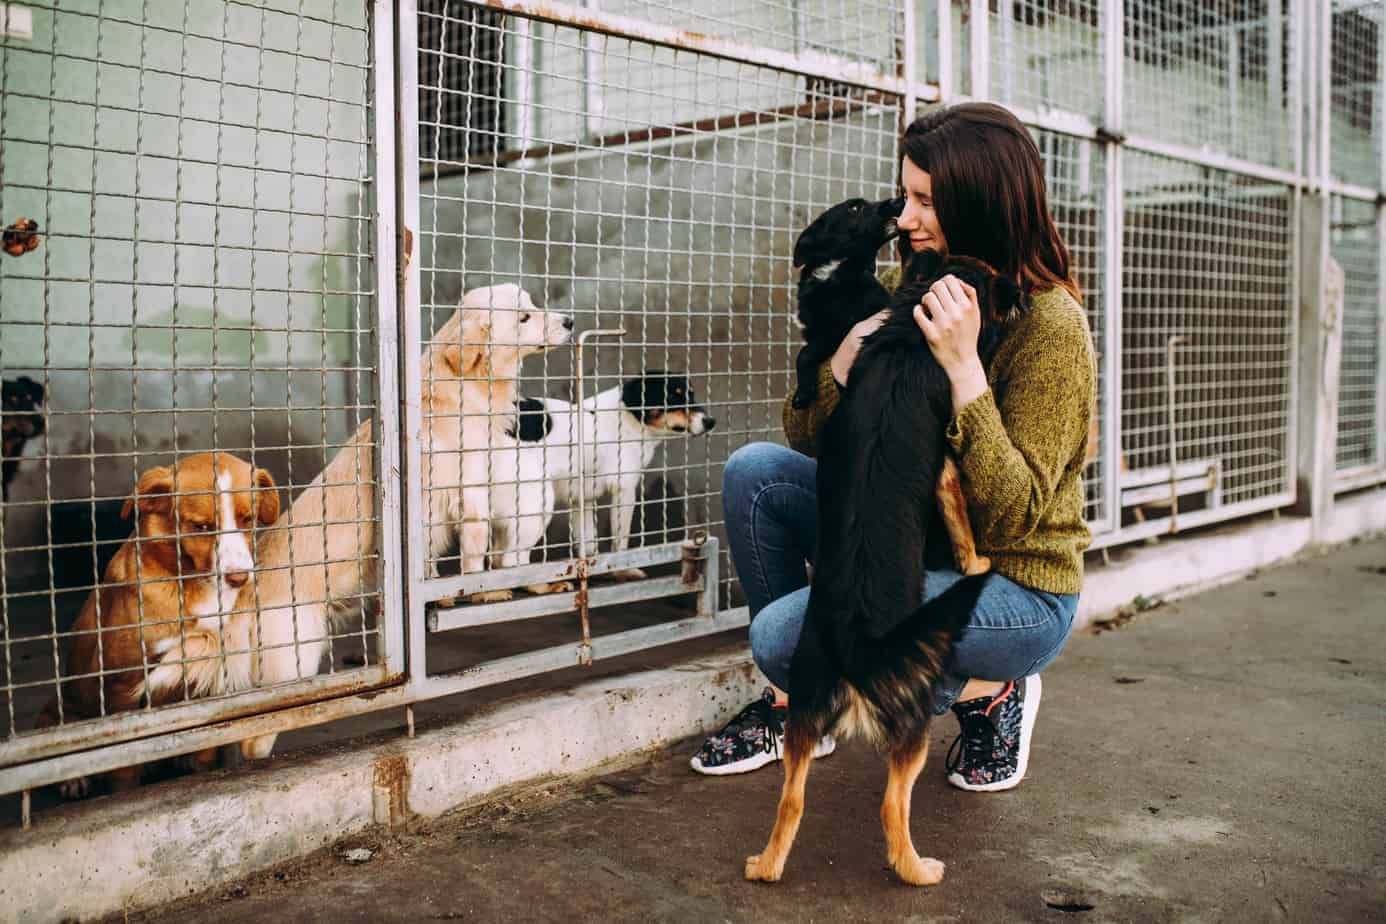 Tips on Adopting or Rescuing Animals from Shelters